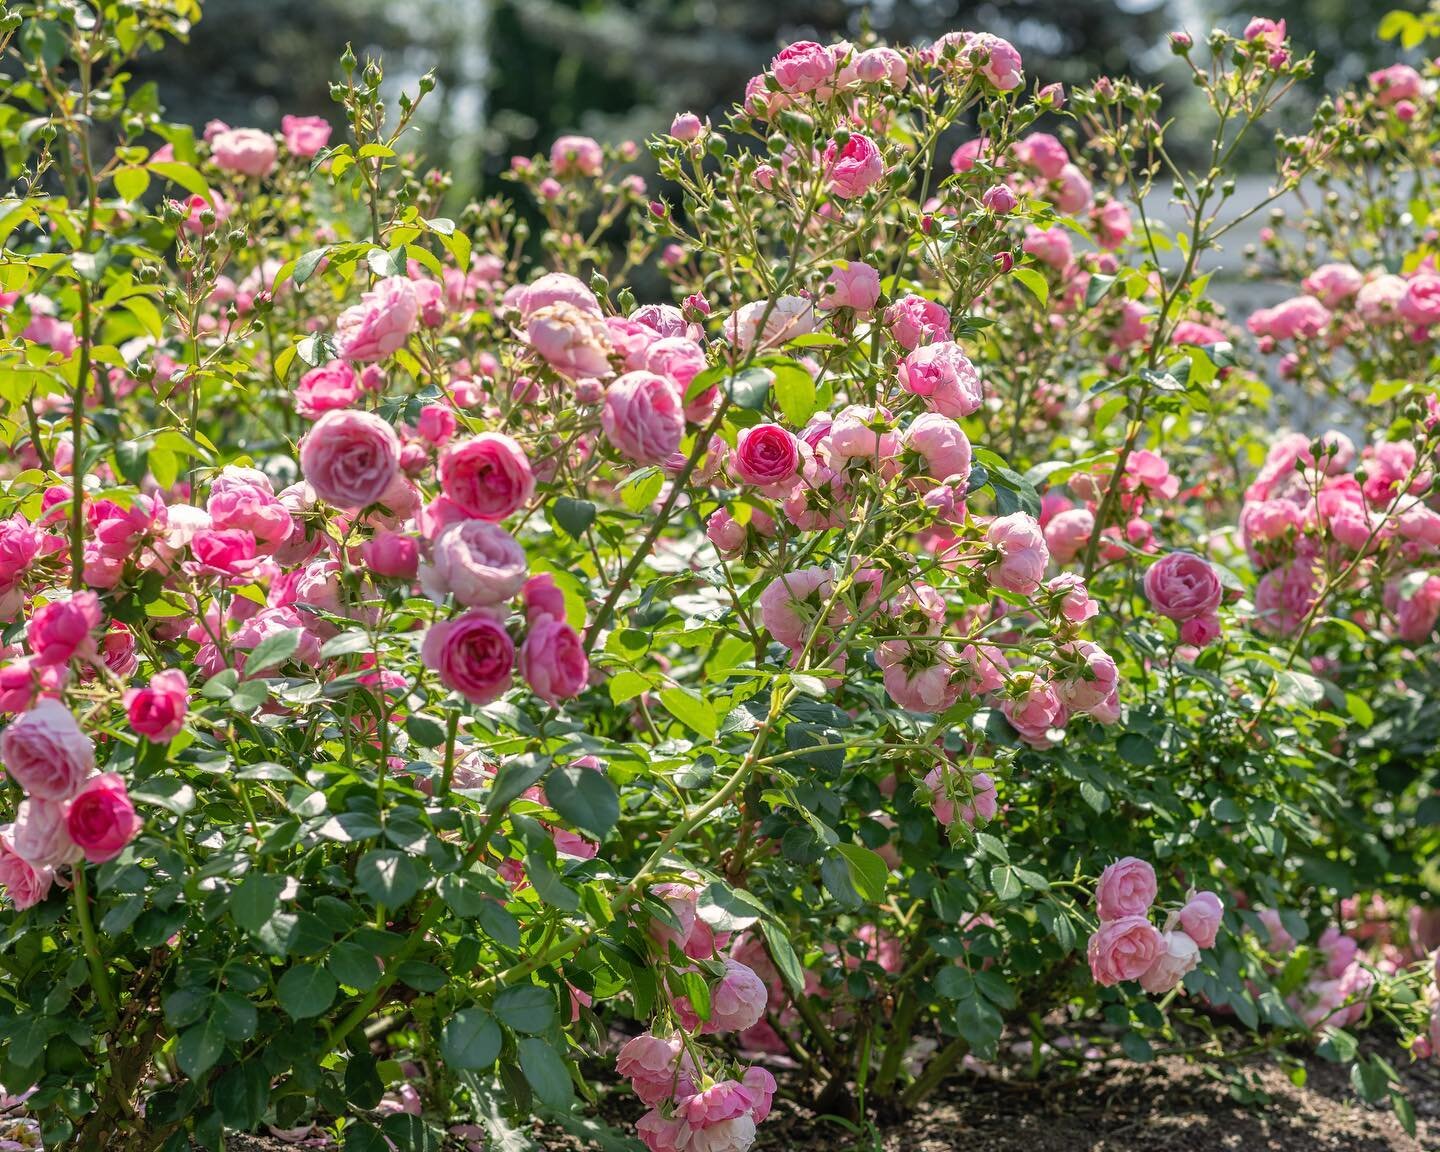 Roses are my favourite flower.  Every mid-June and early August, we take a trip to the Niagara Botanical Gardens in Queenston to walk through the rose gardens. I make sure to smell every variety they have, and my absolute favourites are peach and whi